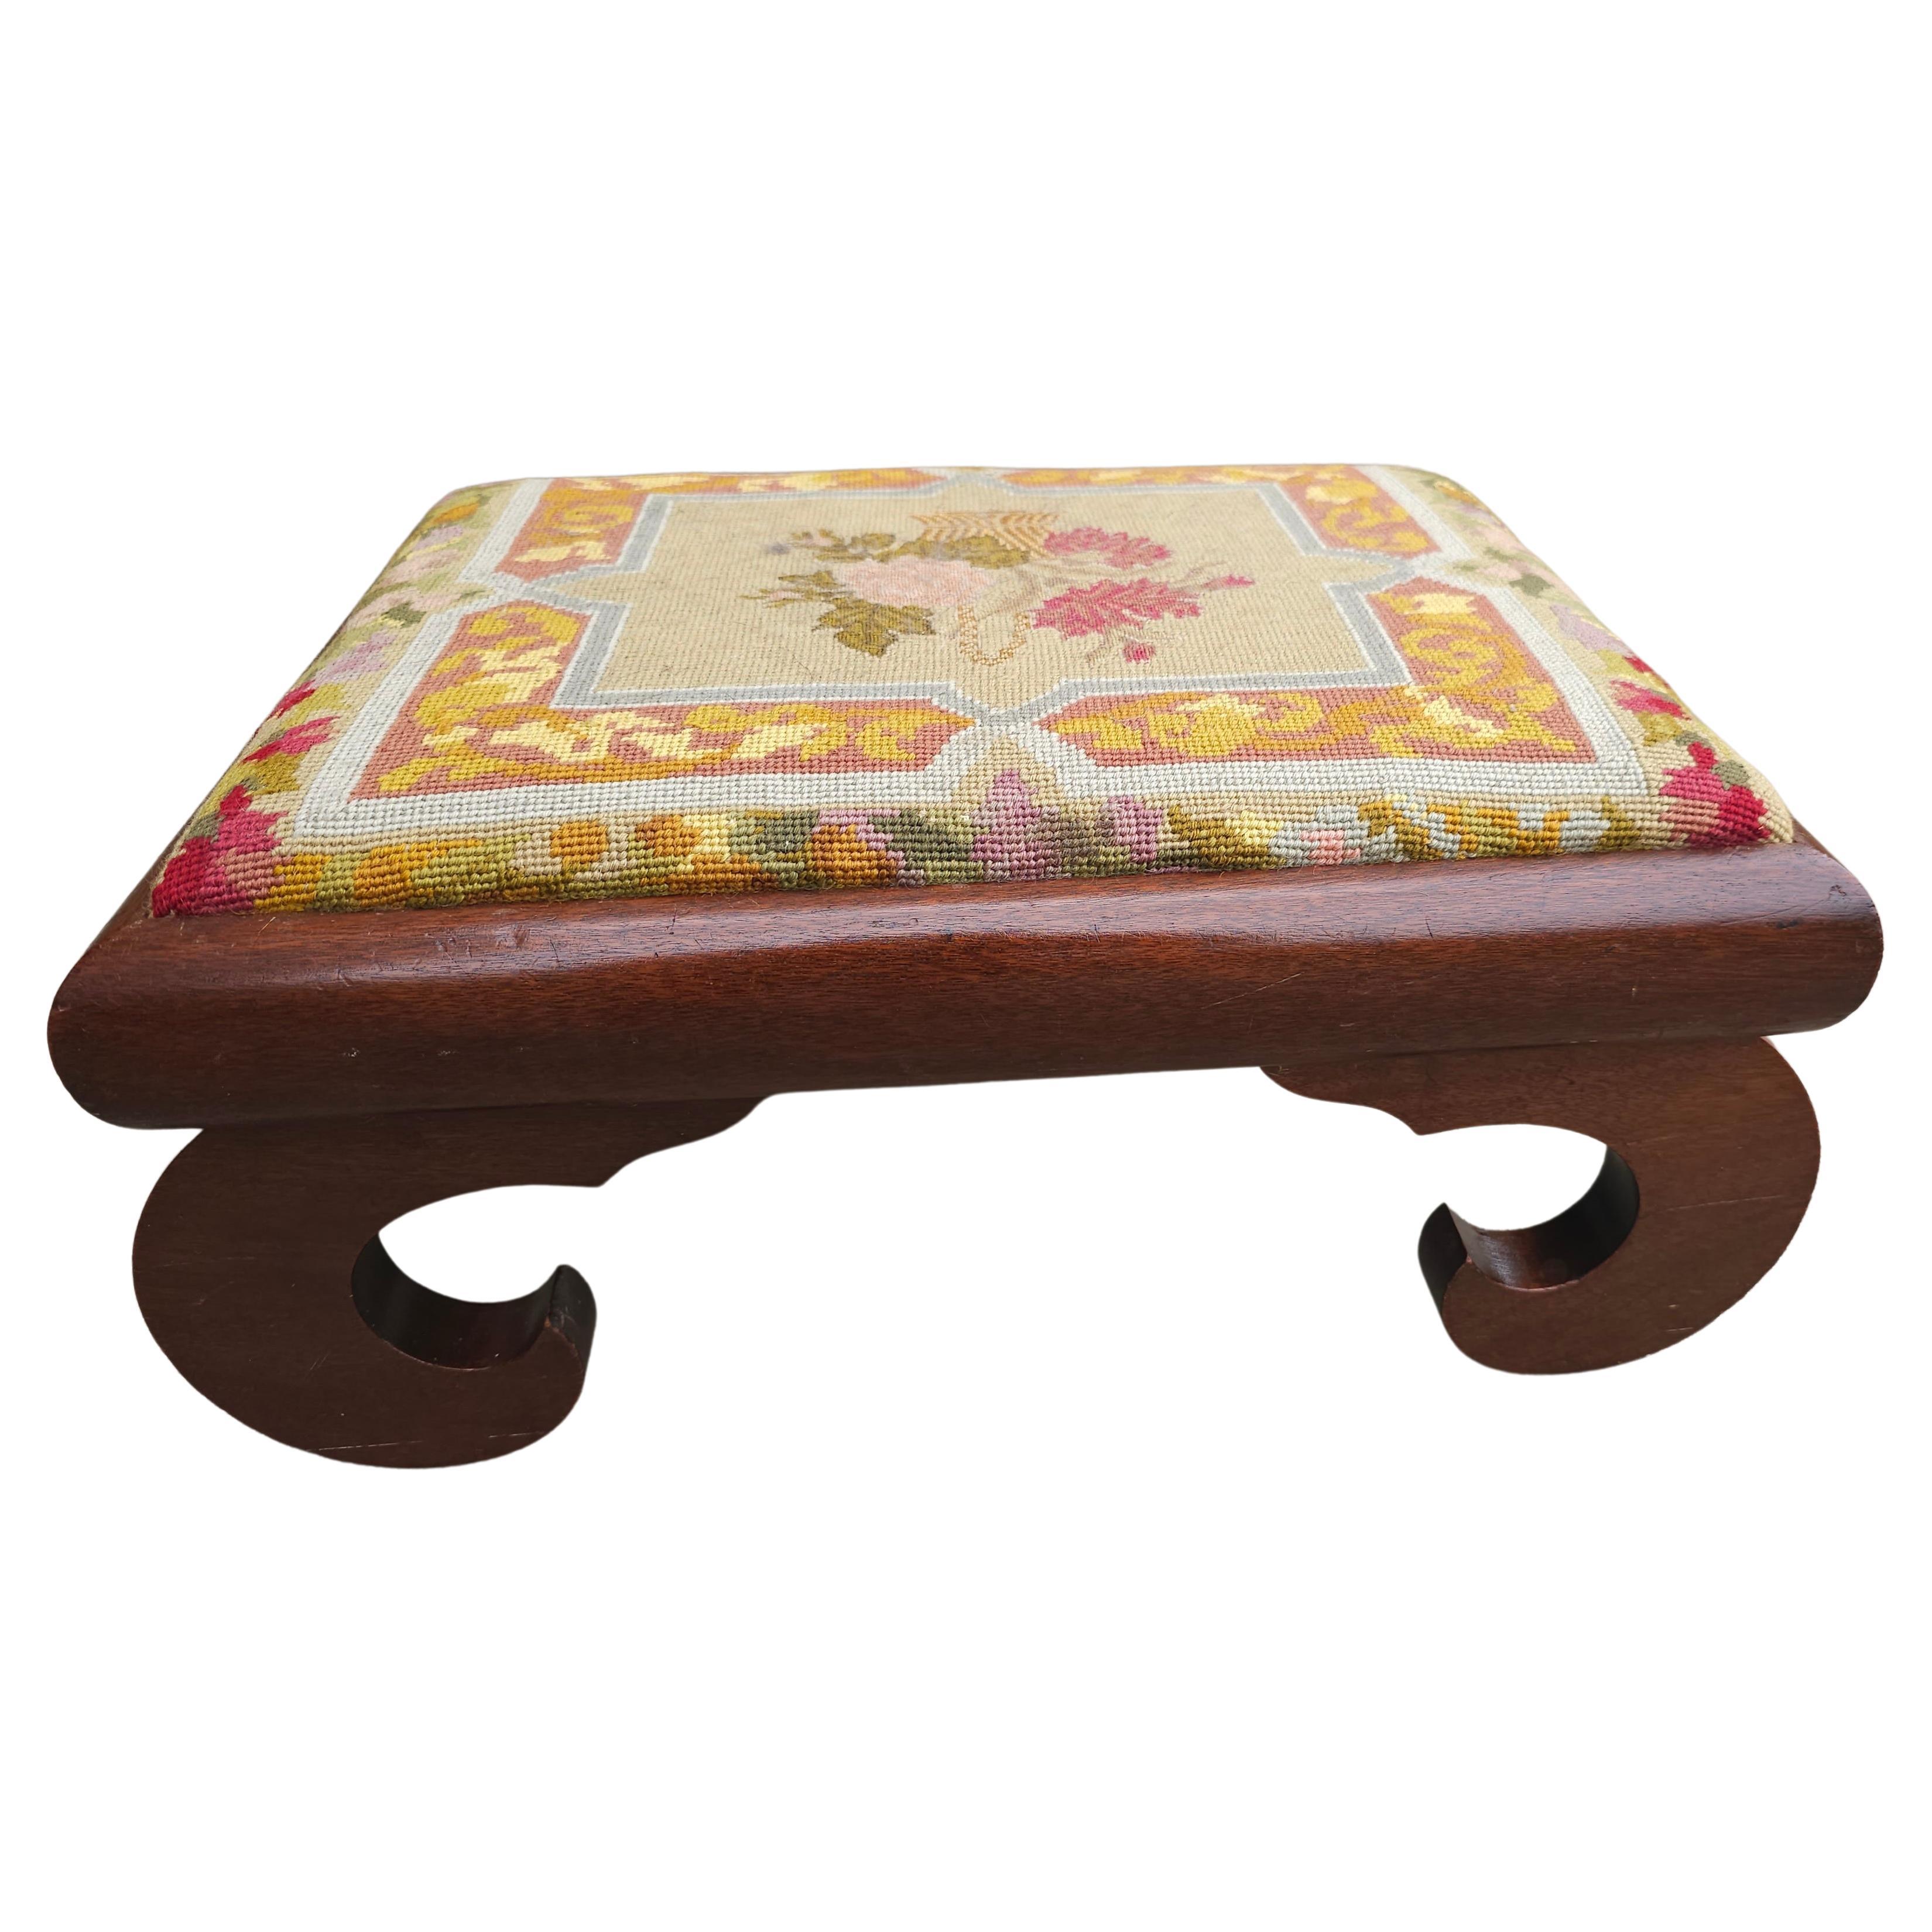 19th Century American Empire Magogany and Needlepoint Upholstered Foot Stool.
Measures 21.75